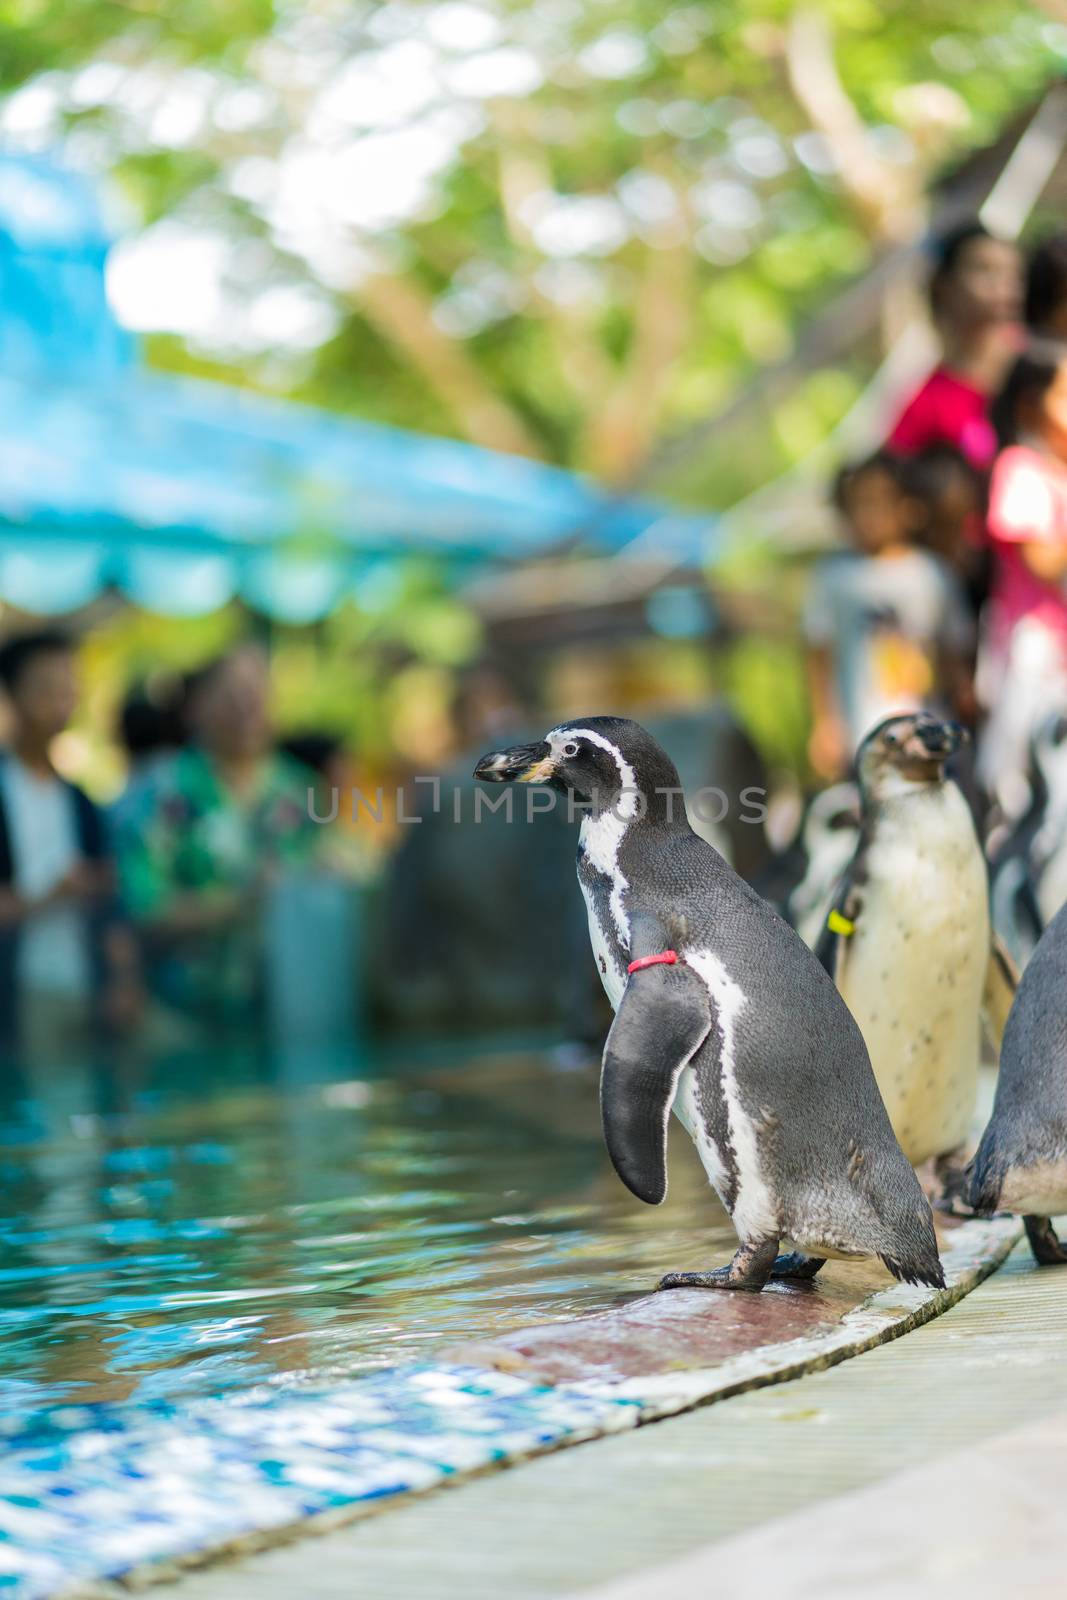 Penguins are standing in the zoo